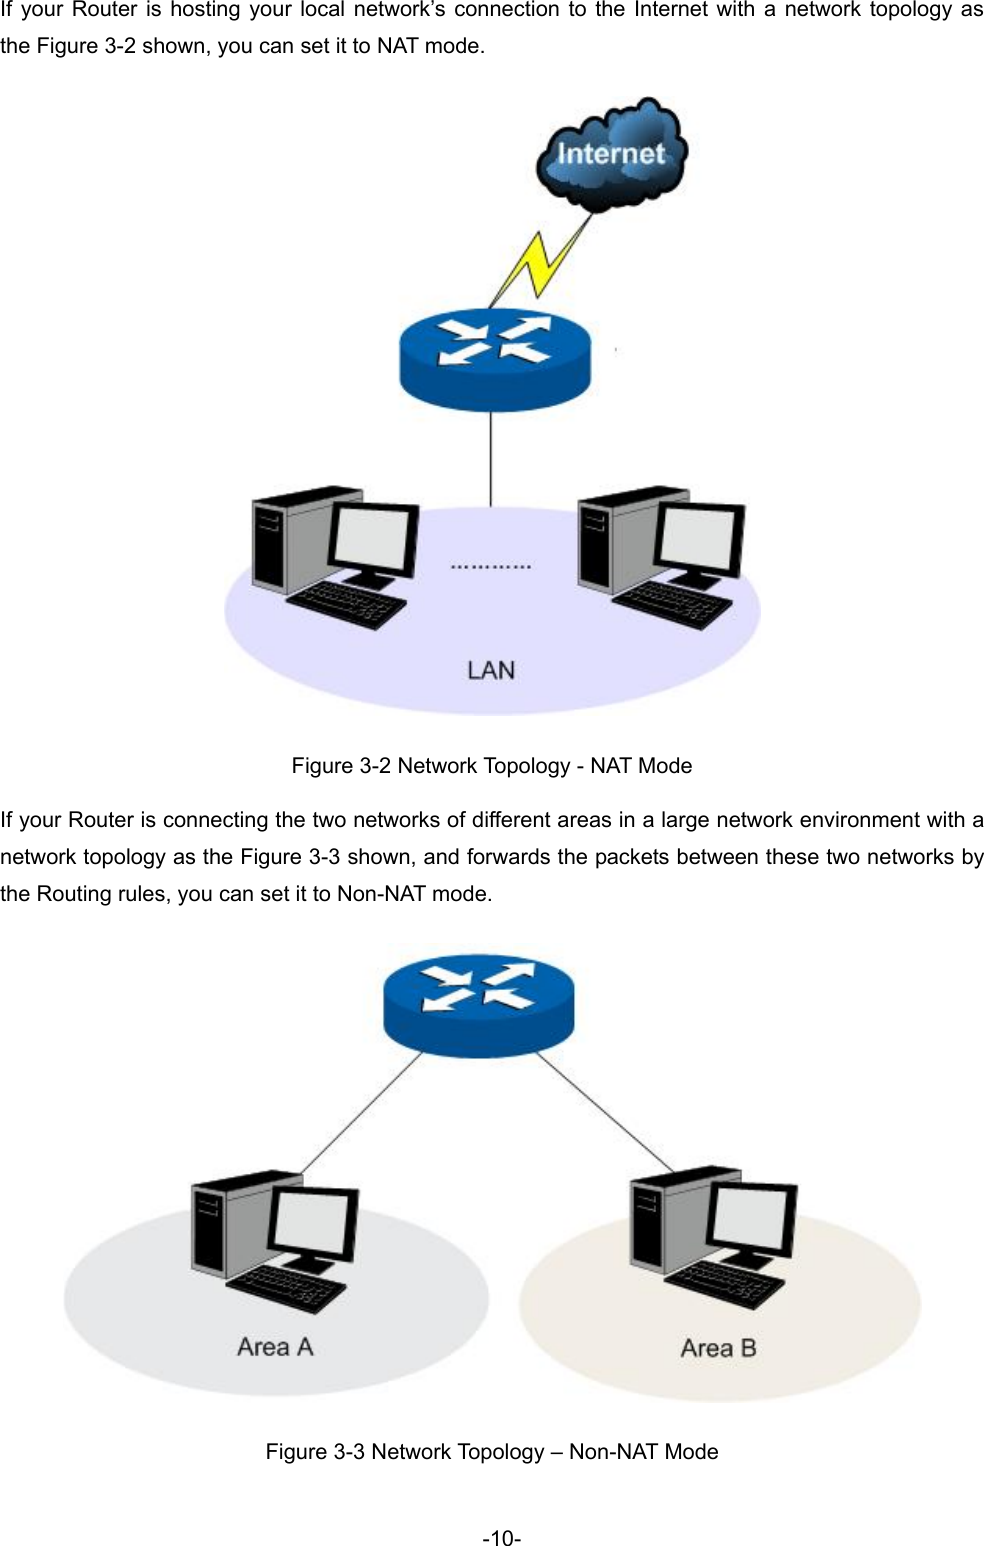  -10- .   If your Router is hosting your local network’s connection to the Internet with a network topology as the Figure 3-2 shown, you can set it to NAT mode Figure 3-2 Network Topology - NAT Mode If your Router is connecting the two networks of different areas in a large network environment with a network topology as the Figure 3-3 shown, and forwards the packets between these two networks by the Routing rules, you can set it to Non-NAT mode.  Figure 3-3 Network Topology – Non-NAT Mode 